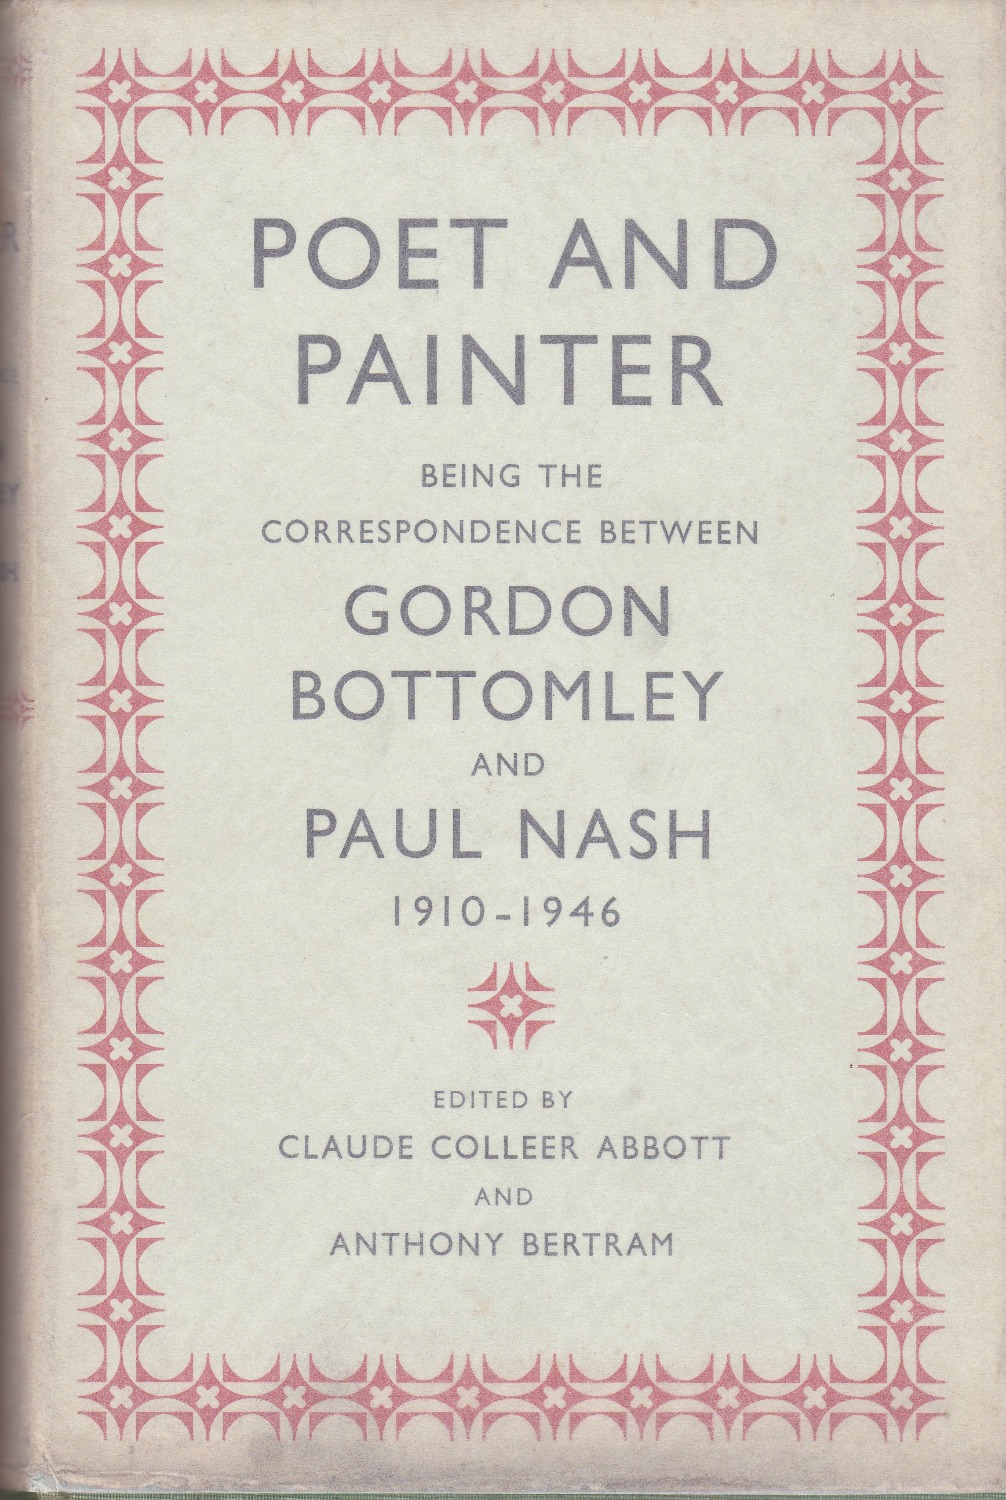 Poet and Painter. Being the Correspondence Between Gordon Bottomley and Paul Nash 1910-1946.